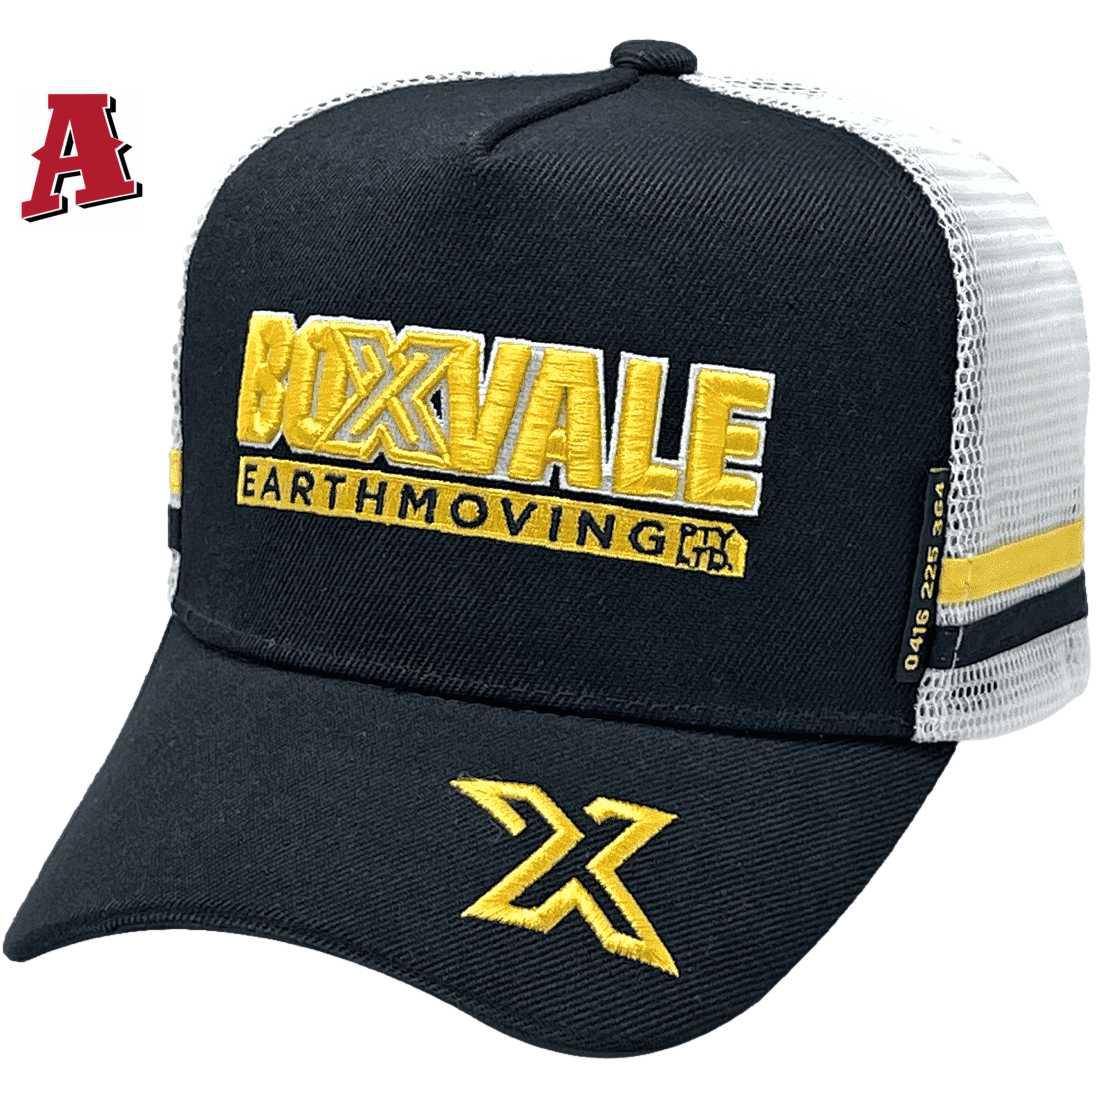 Boxvale Earthmoving Wallaville Qld HP Midrange Aussie Trucker Hats with Australian Head Fit Crown and Double Side Bands